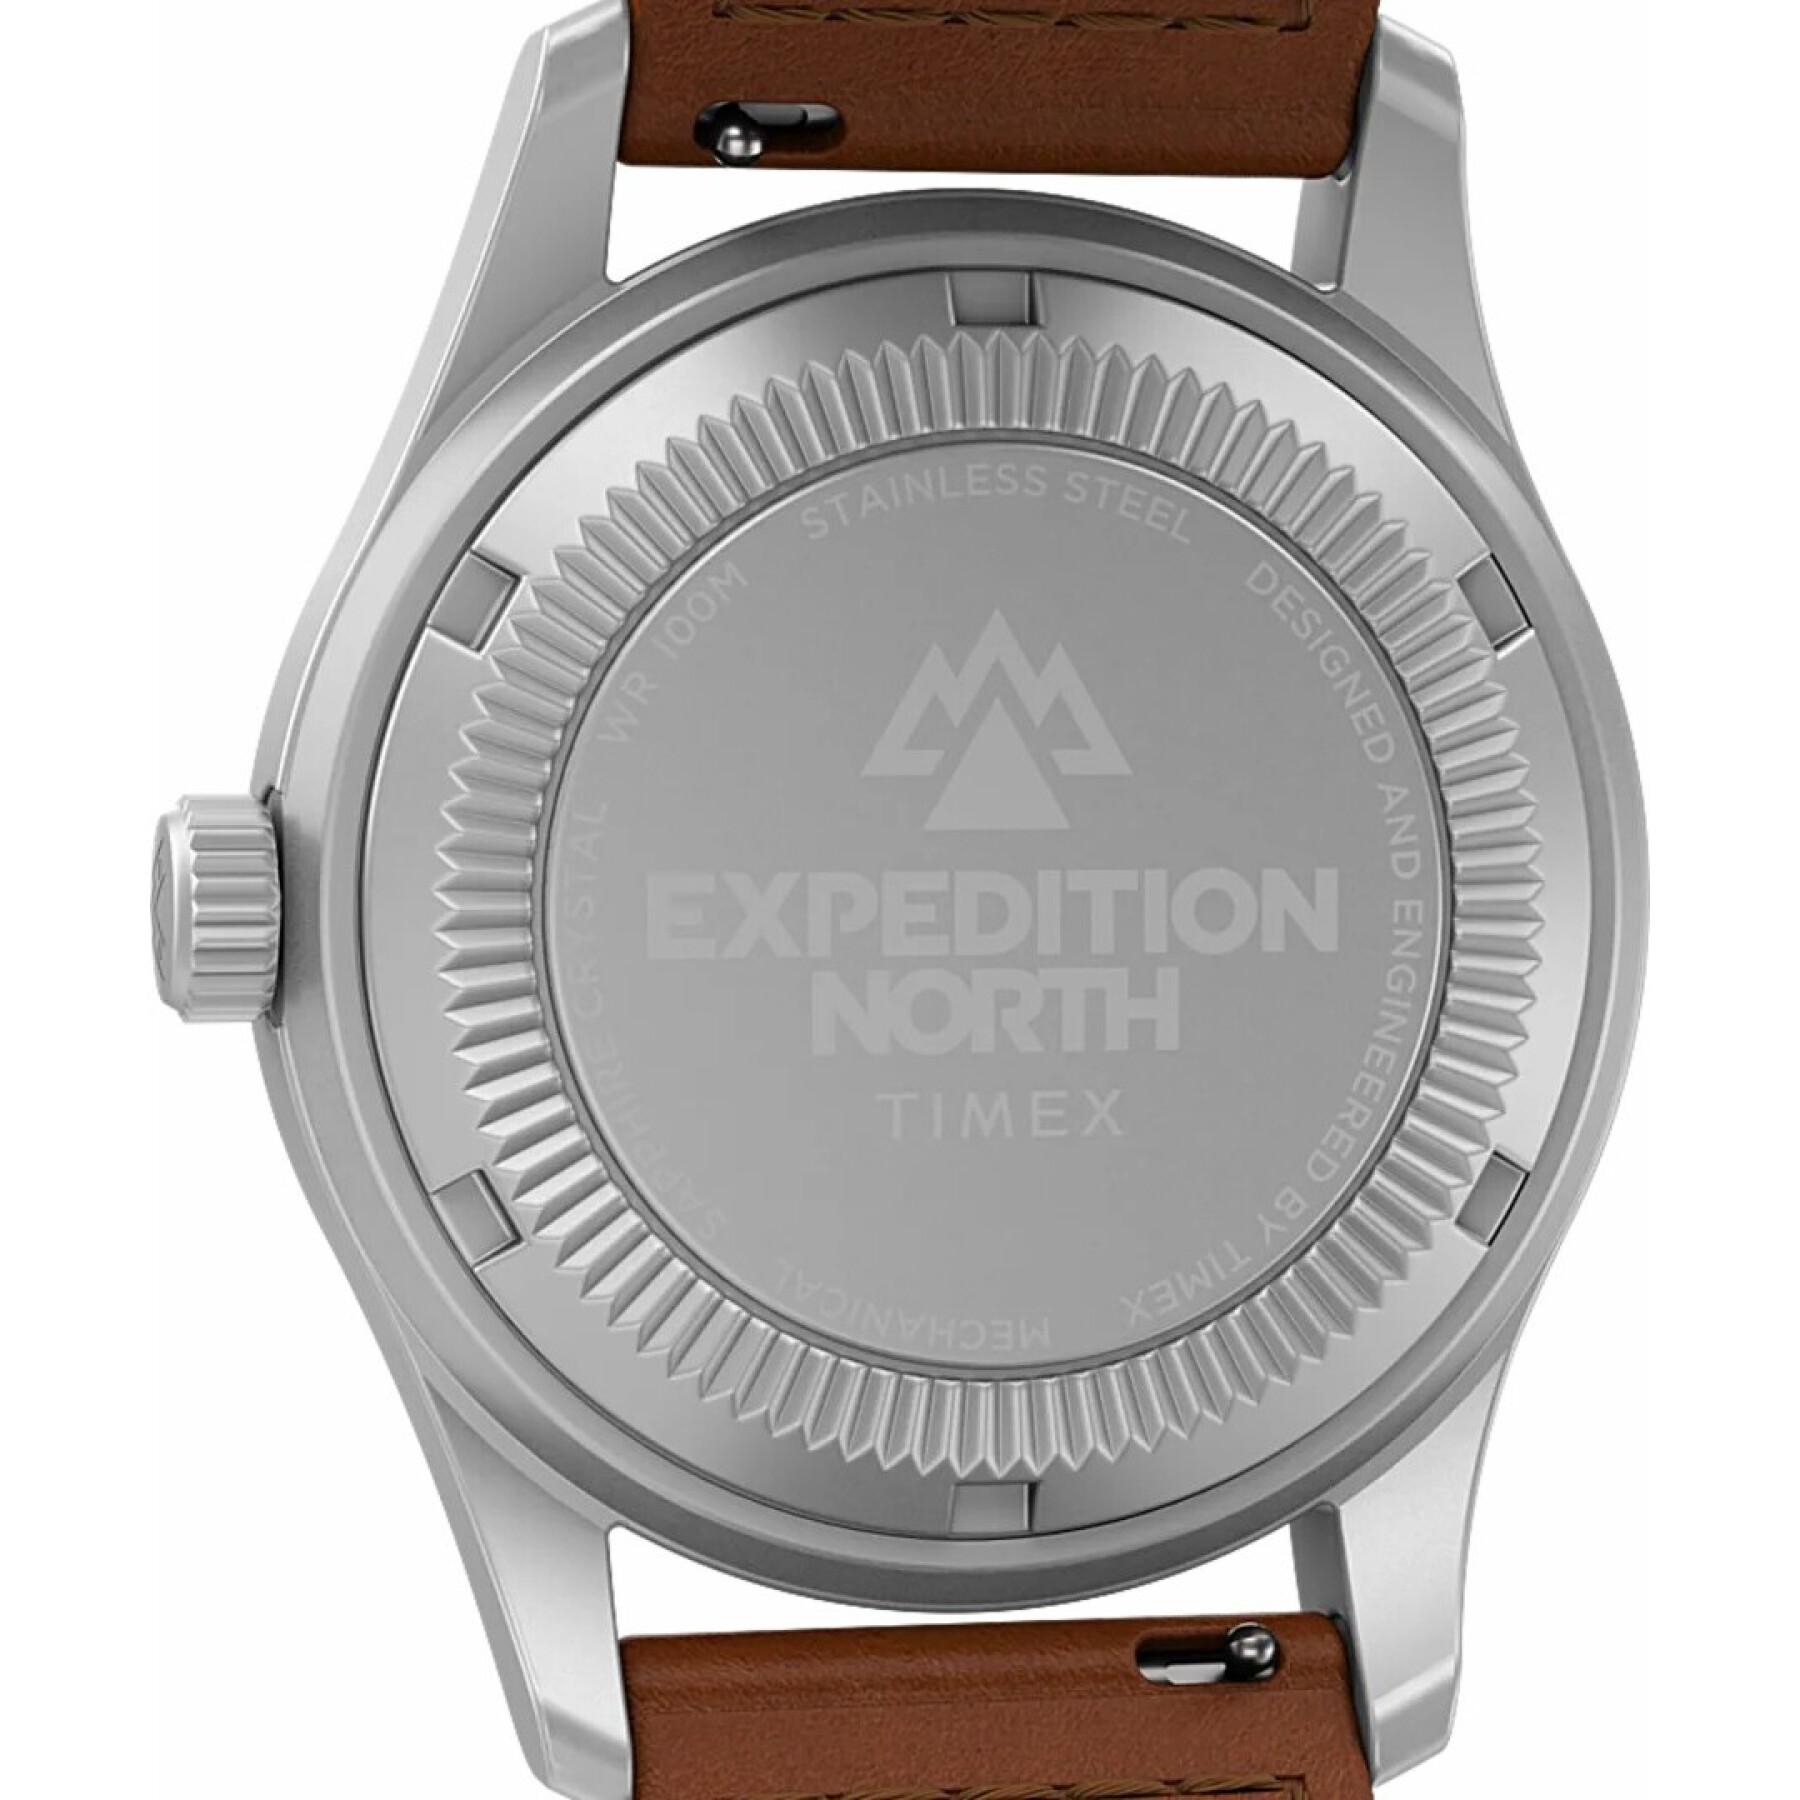 Horloge Timex Expedition North Tide Temp Compass